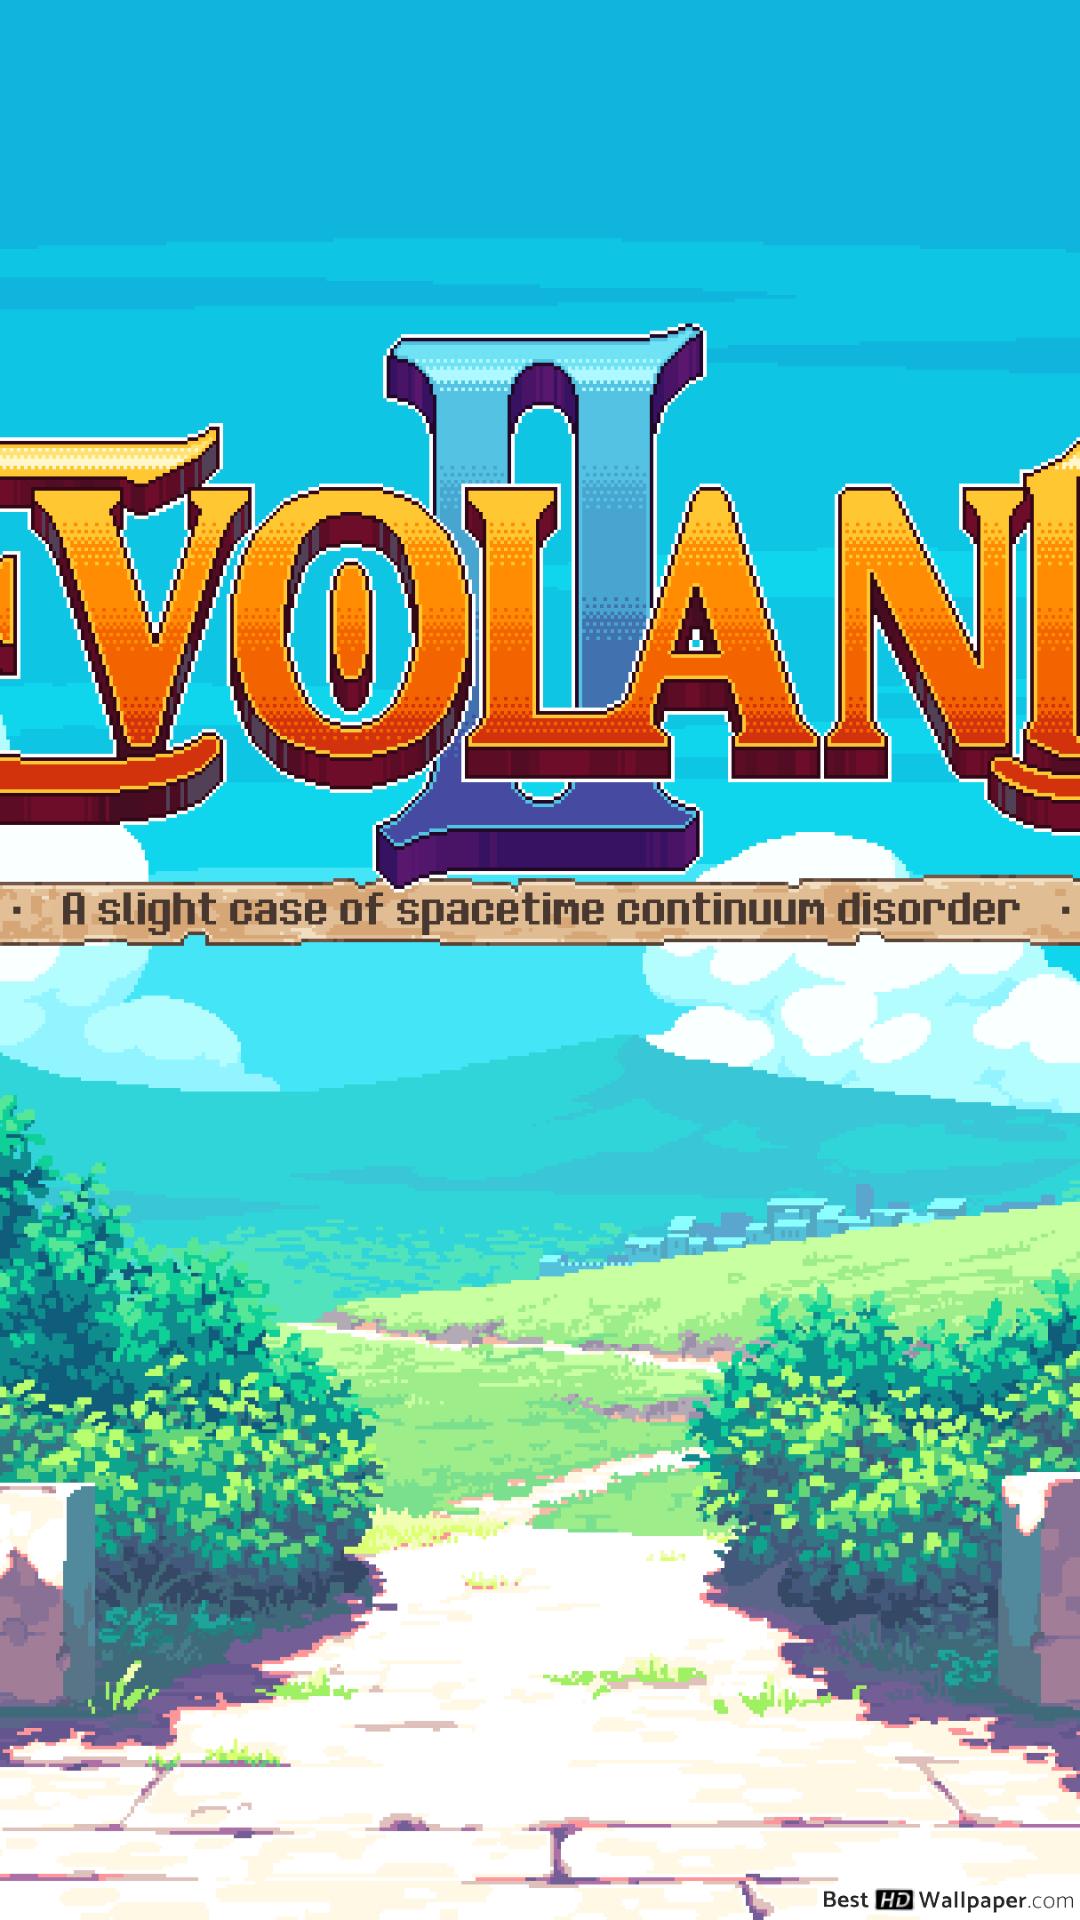 Evoland Wallpaper Image In Collection